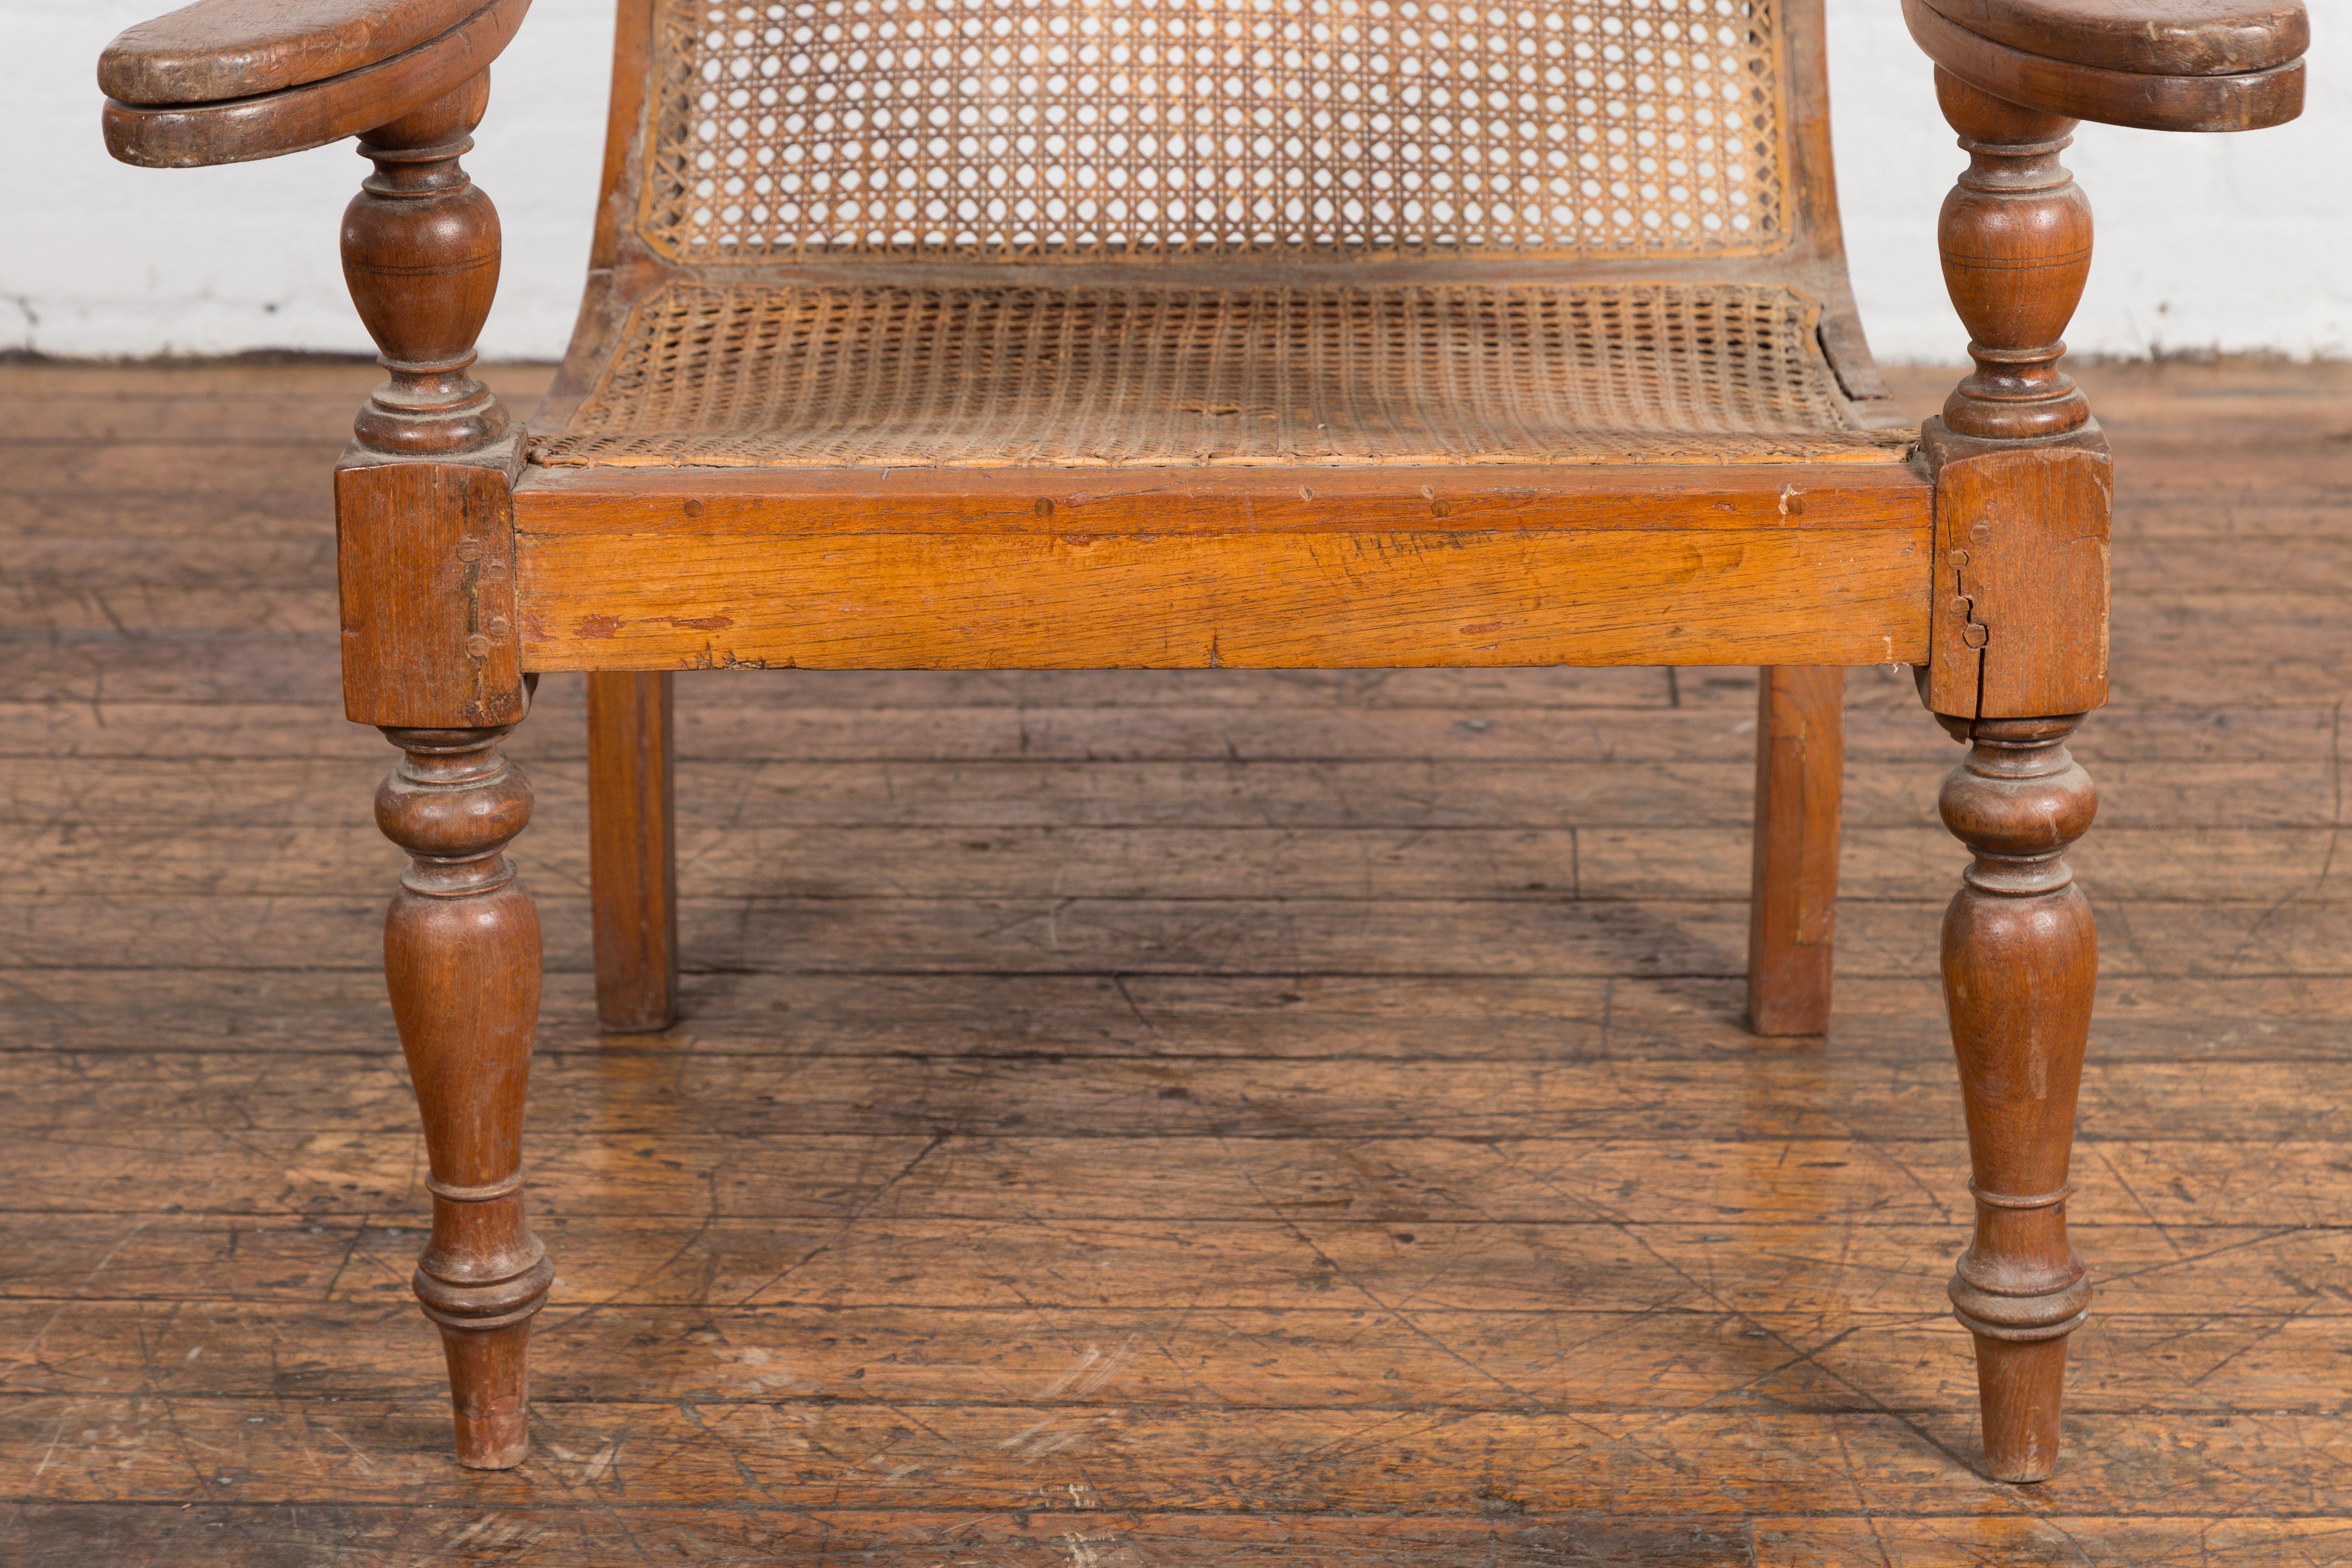 Dutch Colonial Indonesian Cane and Wood Plantation Chair with Extending Arms In Good Condition For Sale In Yonkers, NY